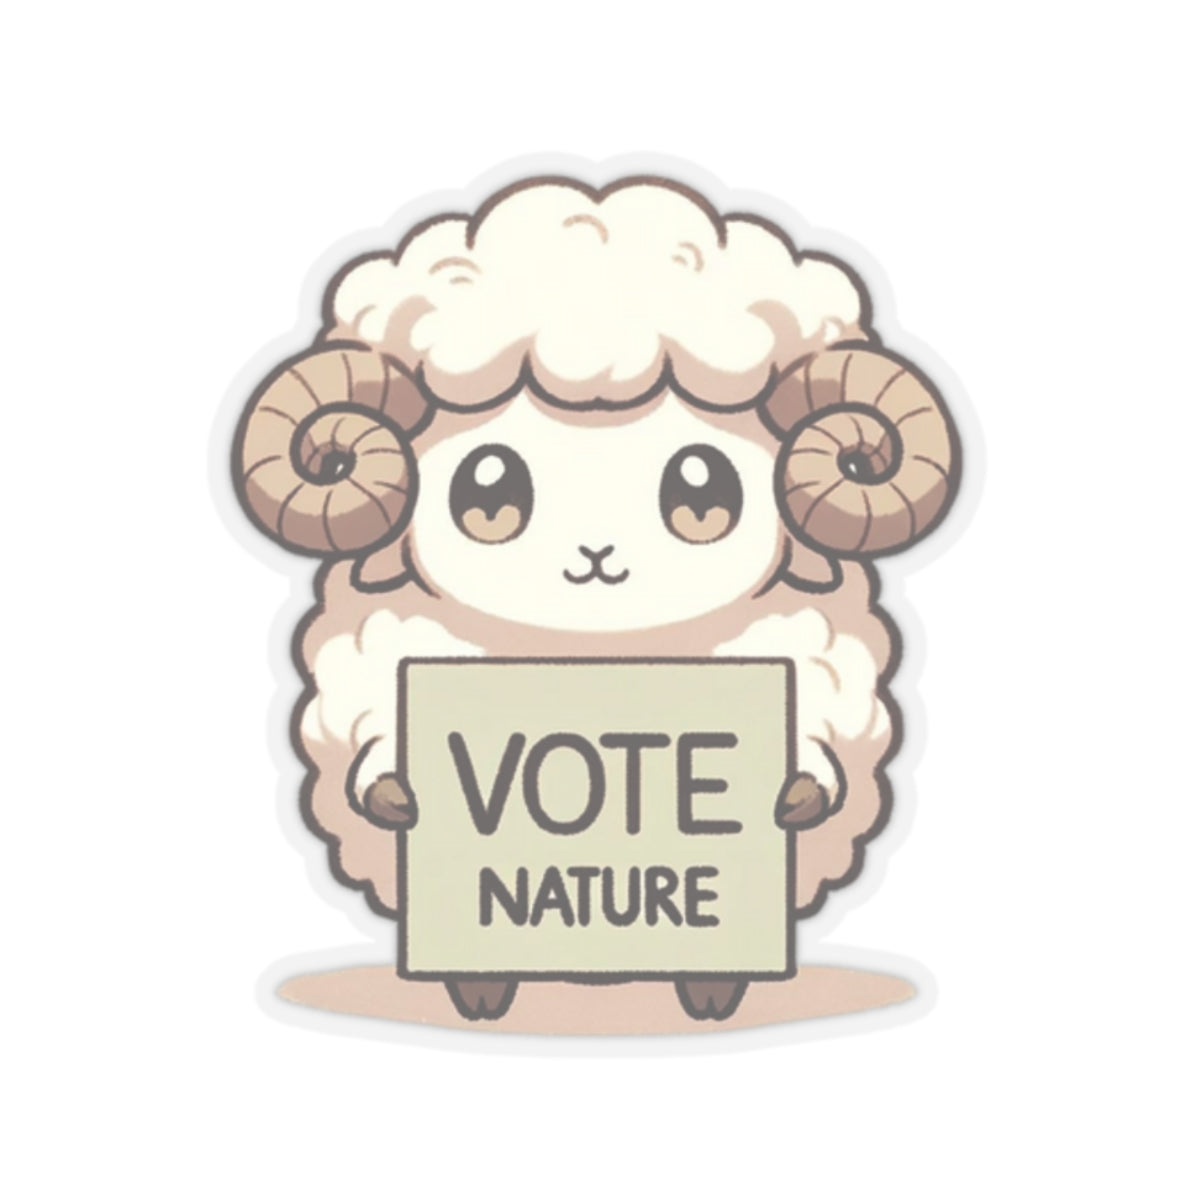 Inspirational Cute Ram Statement vinyl Sticker: Vote Nature! for laptop, kindle, phone, ipad, instrument case, notebook, mood board, or wall